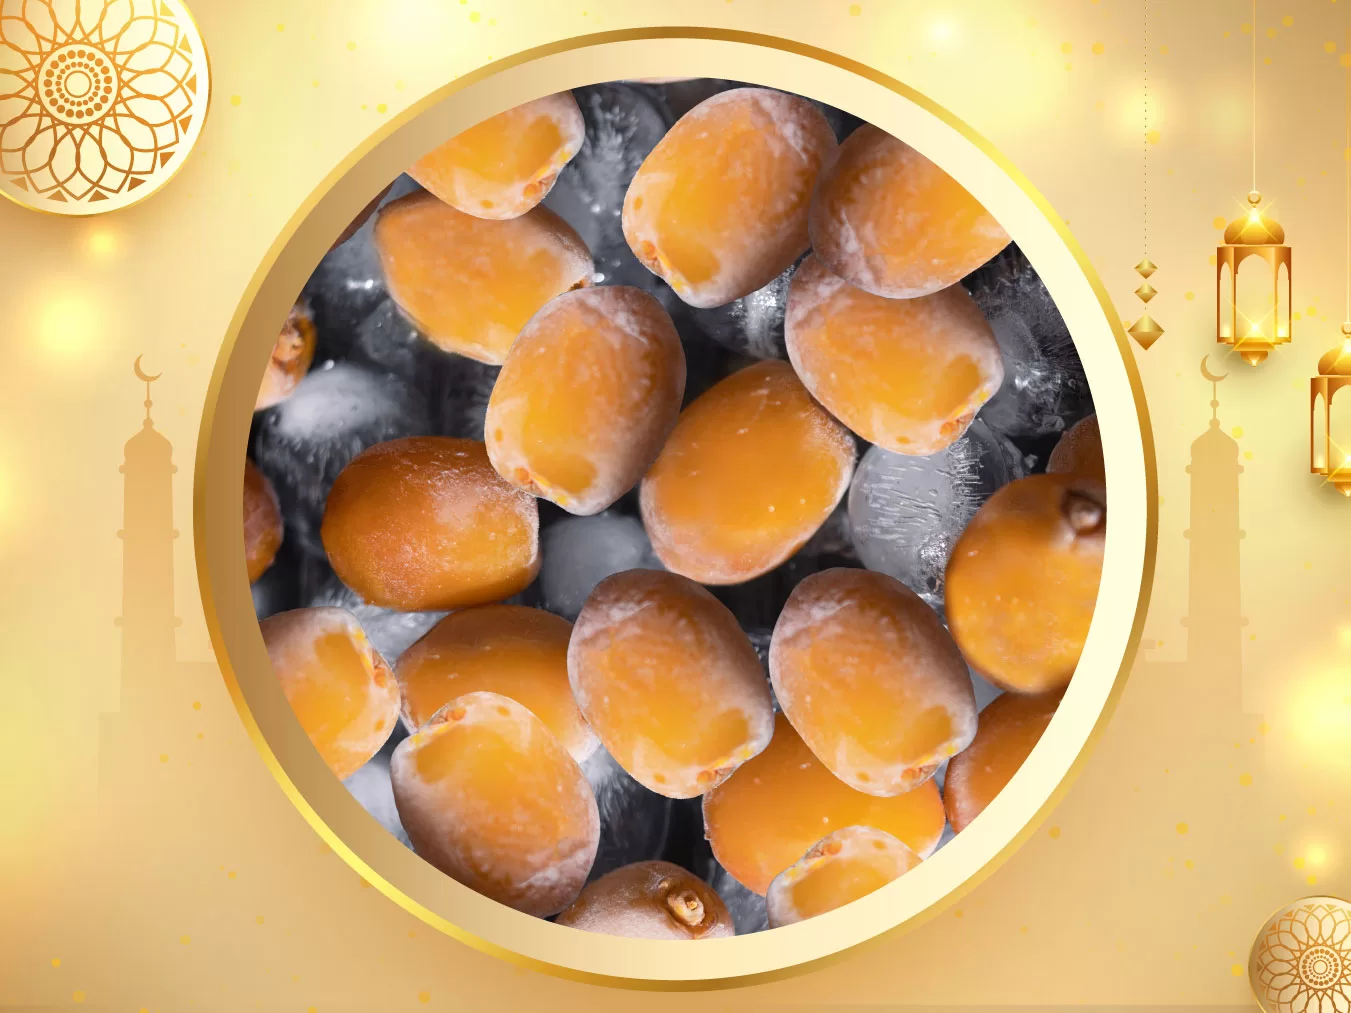 Rare and Delicious - Why Frozen Rotana Rutaab Dates are Ideal for Ramdan